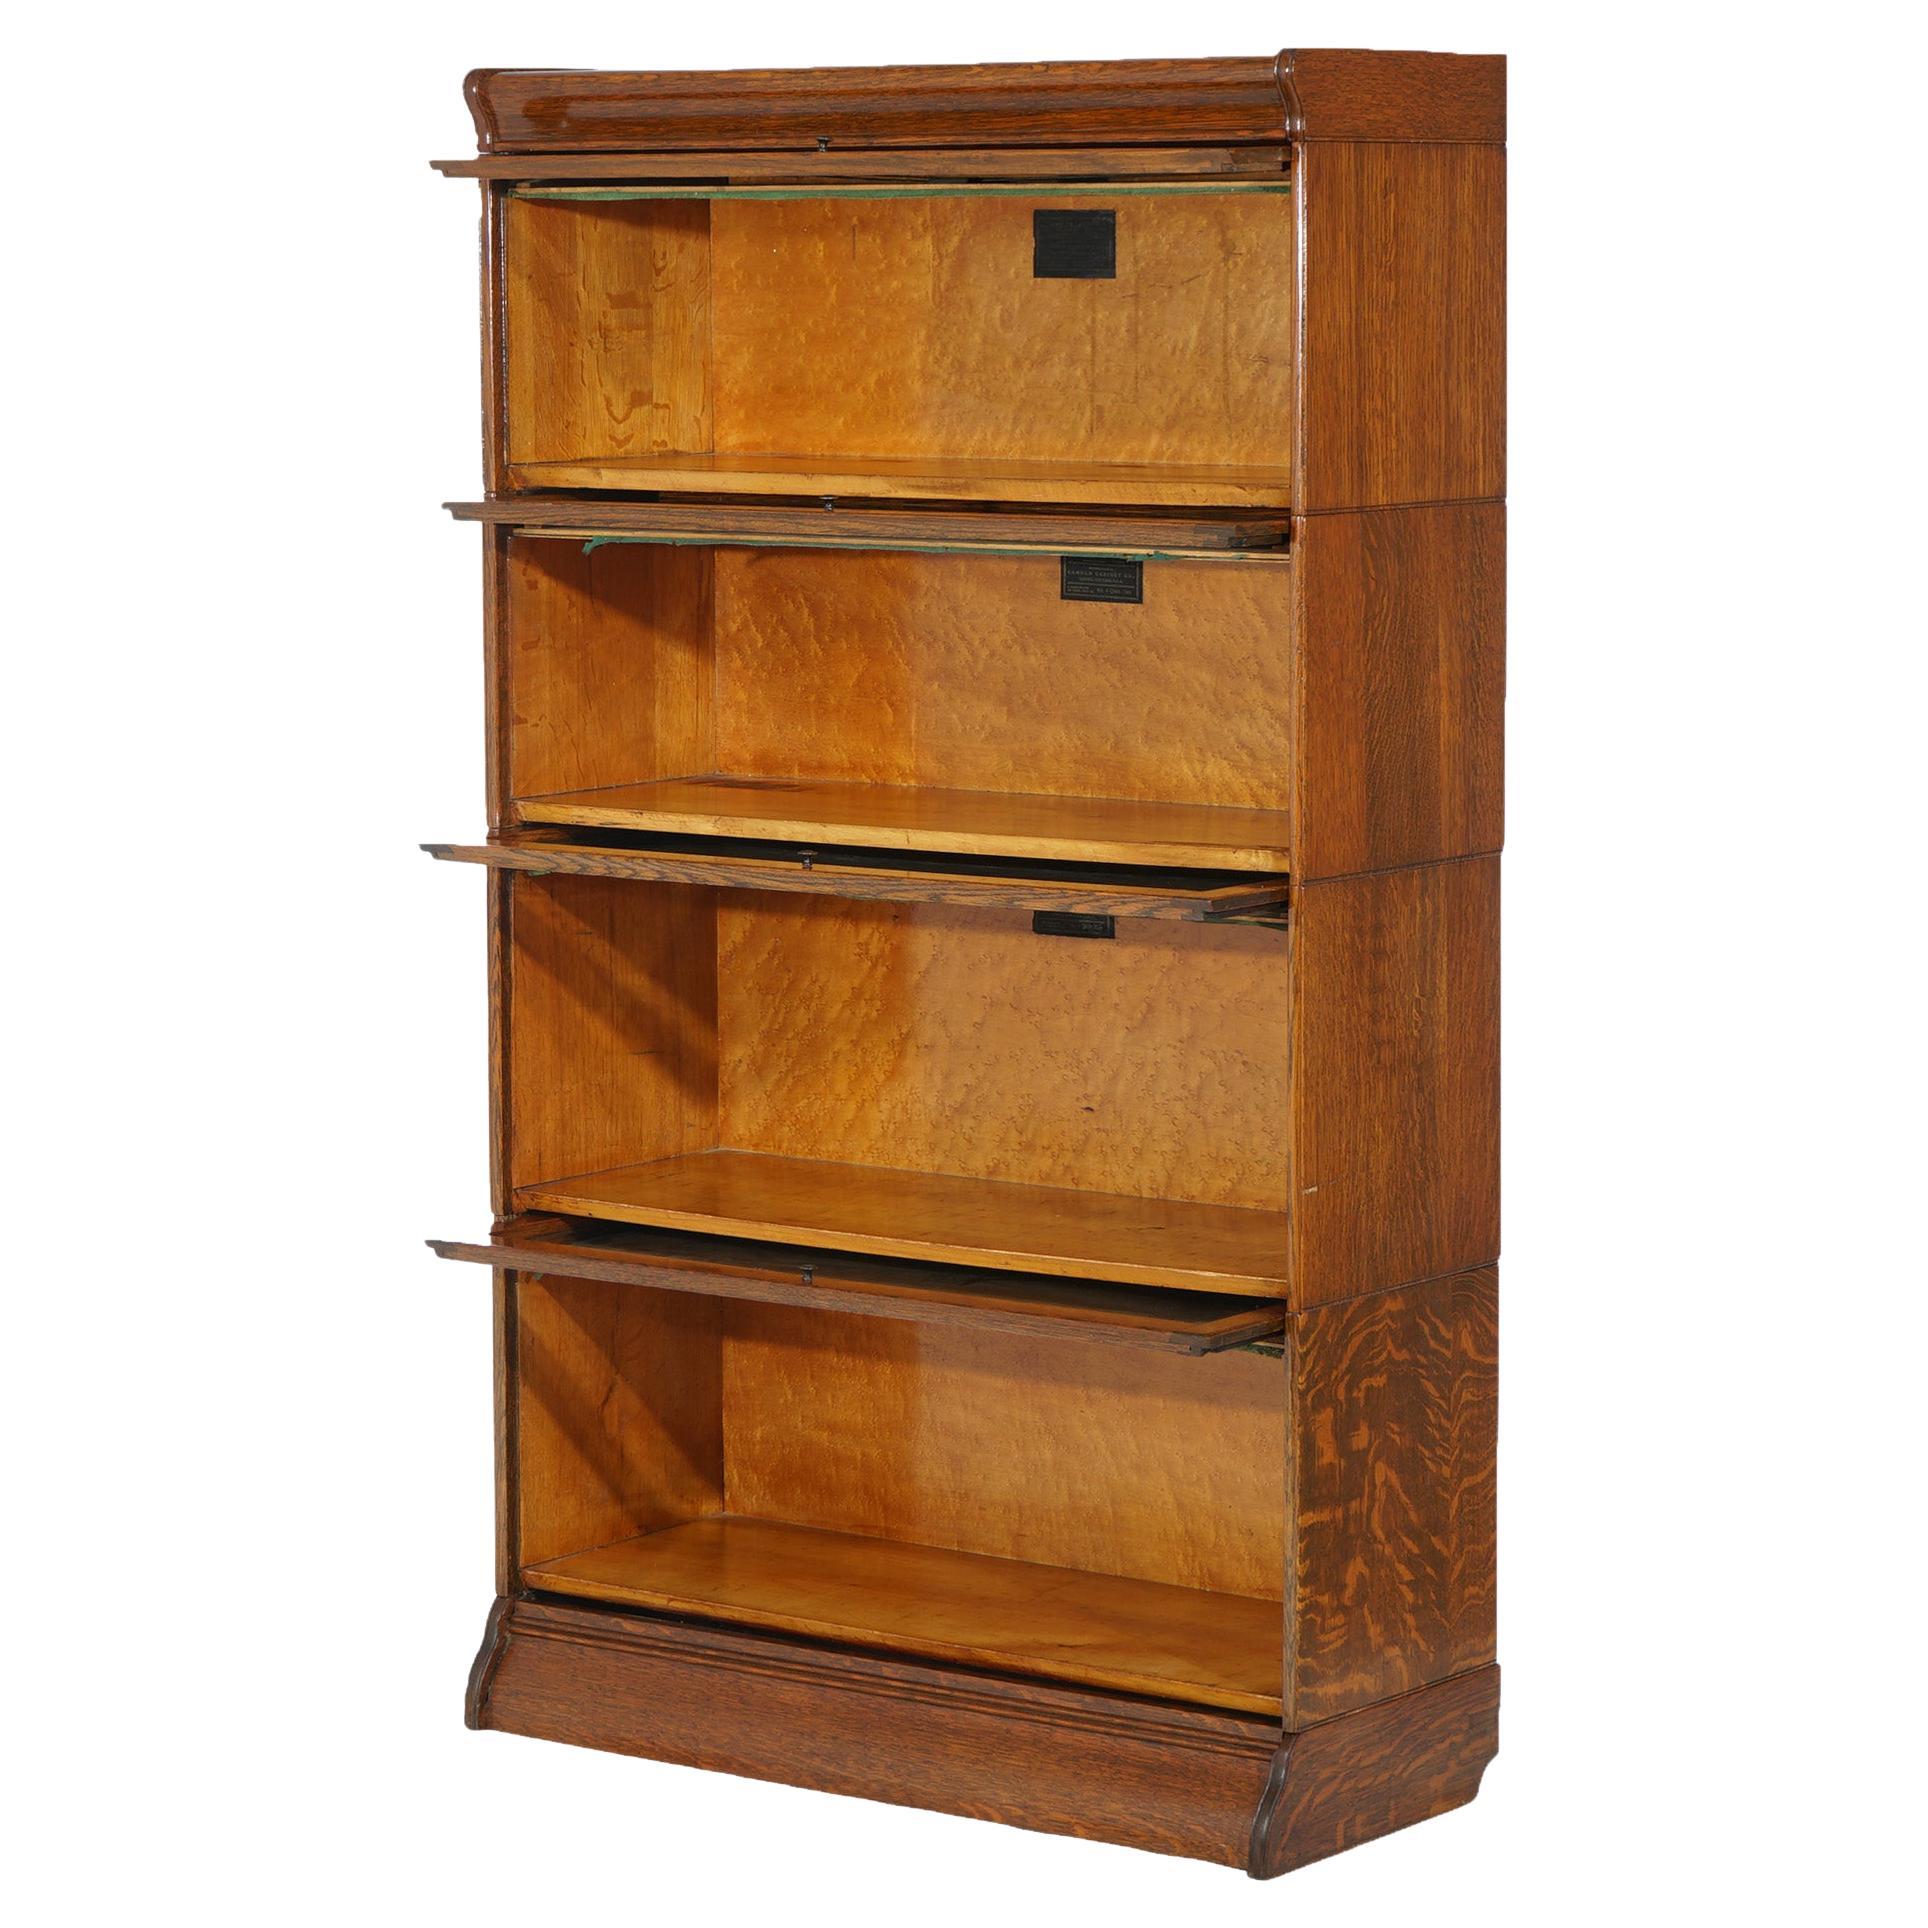 An antique Arts & Crafts barrister bookcase by Hale offers oak construction with four stacks, each having pull out glass doors, raised on an ogee base, maker label as photographed, circa 1910

Measures - 58.25 x 38.25 x 14